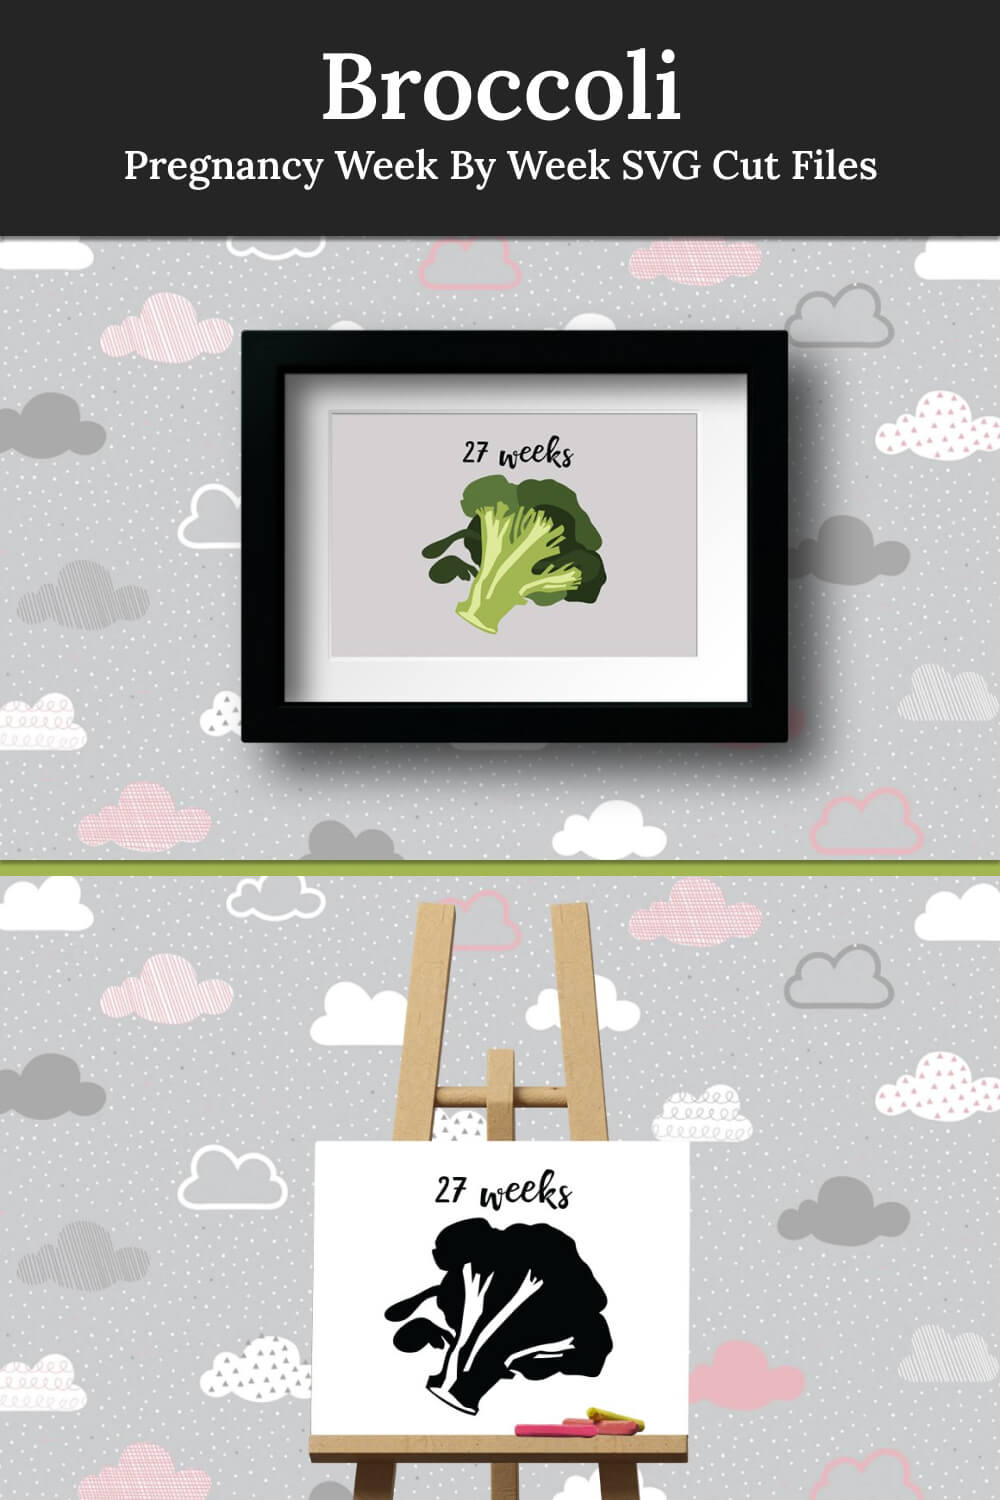 On the background with clouds there are drawings with 2 broccoli and inscriptions of 27 weeks.